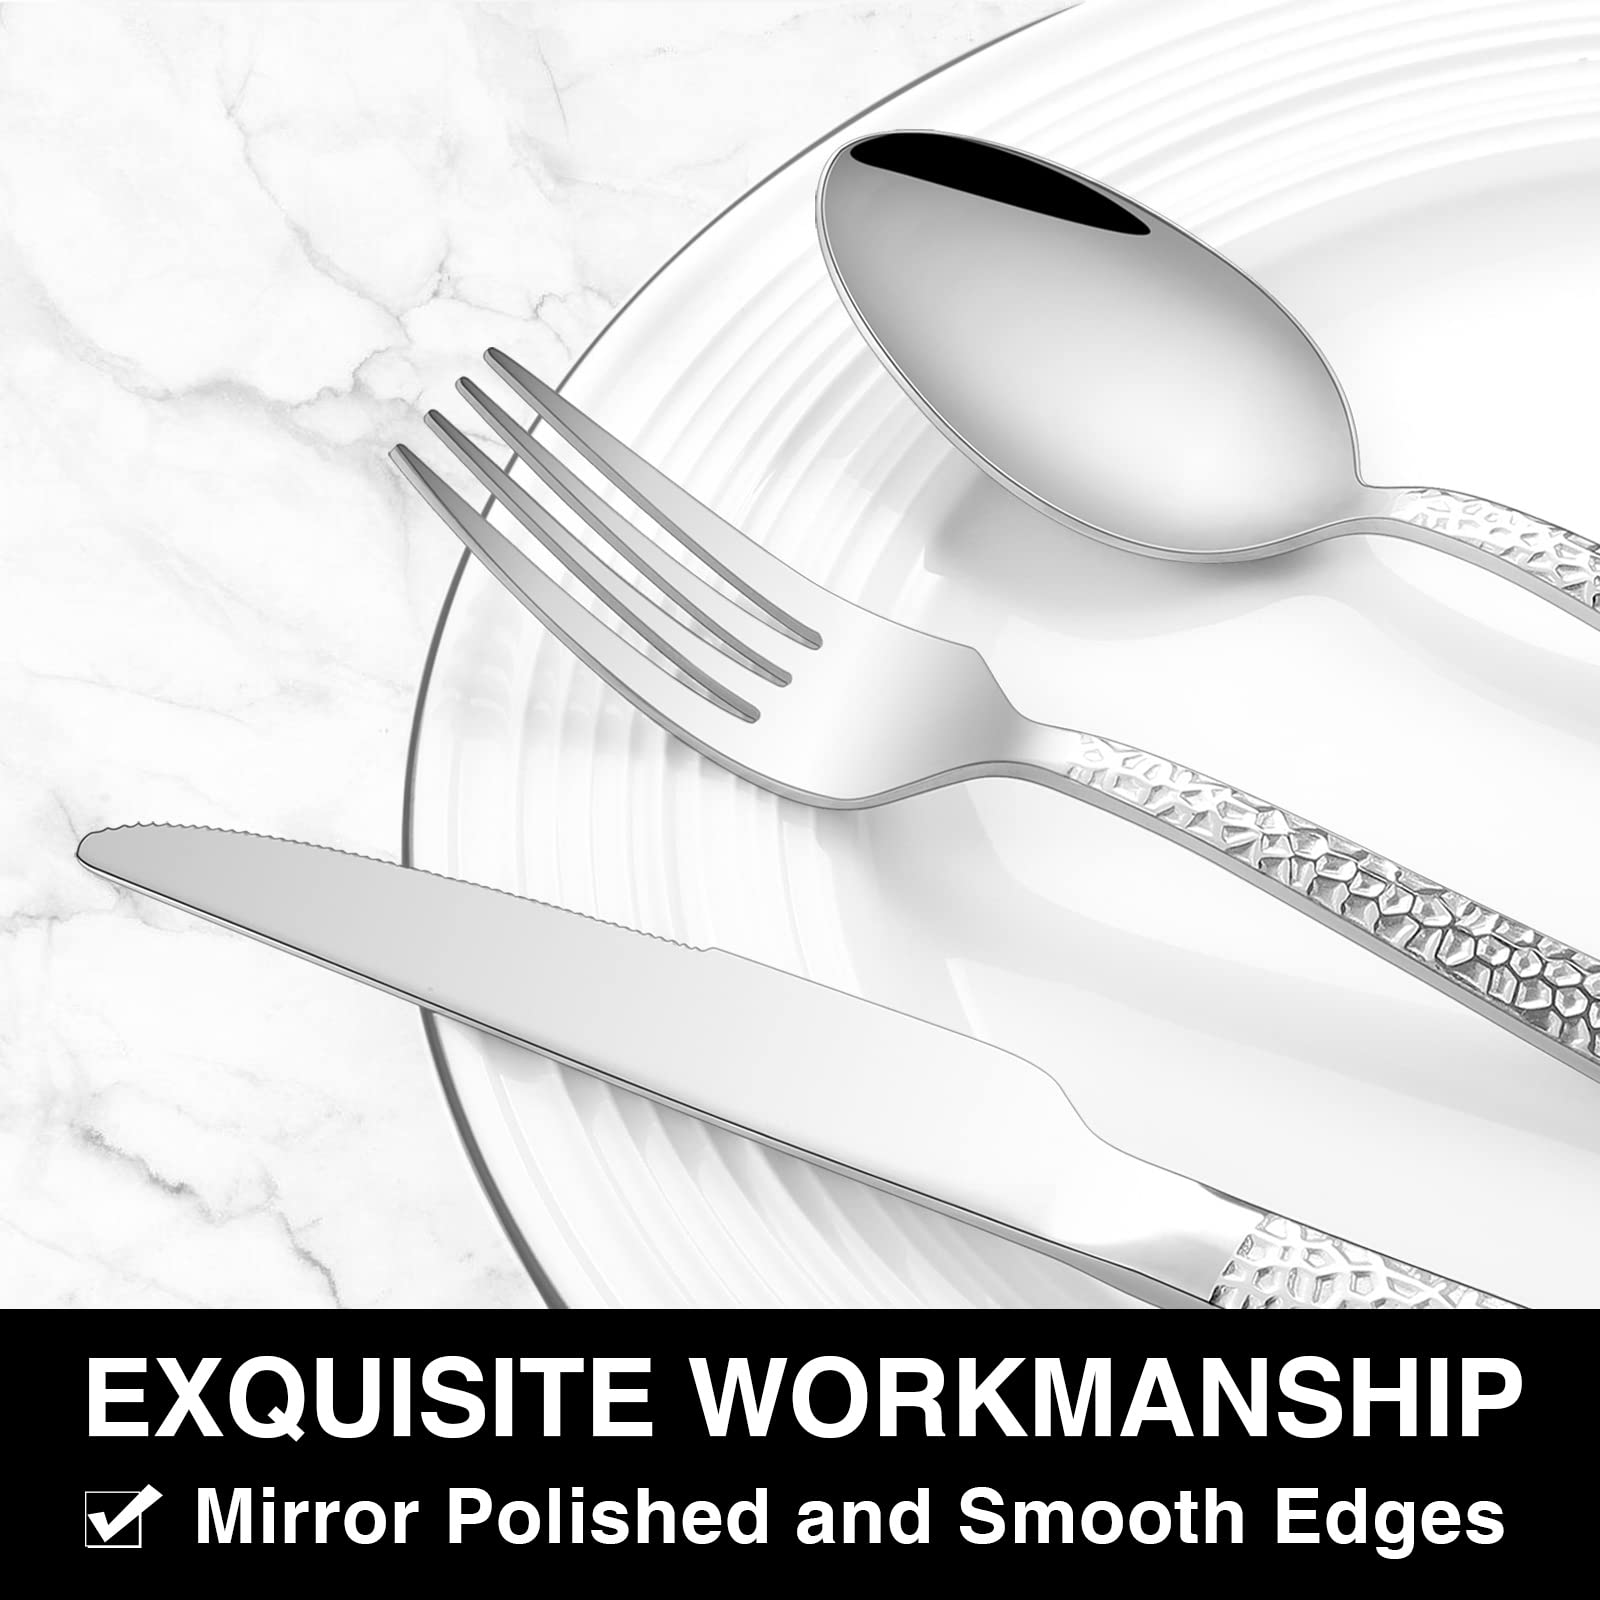 40-Piece Hammered Silverware Set with Organizer, Stainless Steel Square Flatware Set for 8, Food-Grade Tableware Cutlery Set, Utensil Sets for Home Restaurant, Mirror Finish, Dishwasher Safe